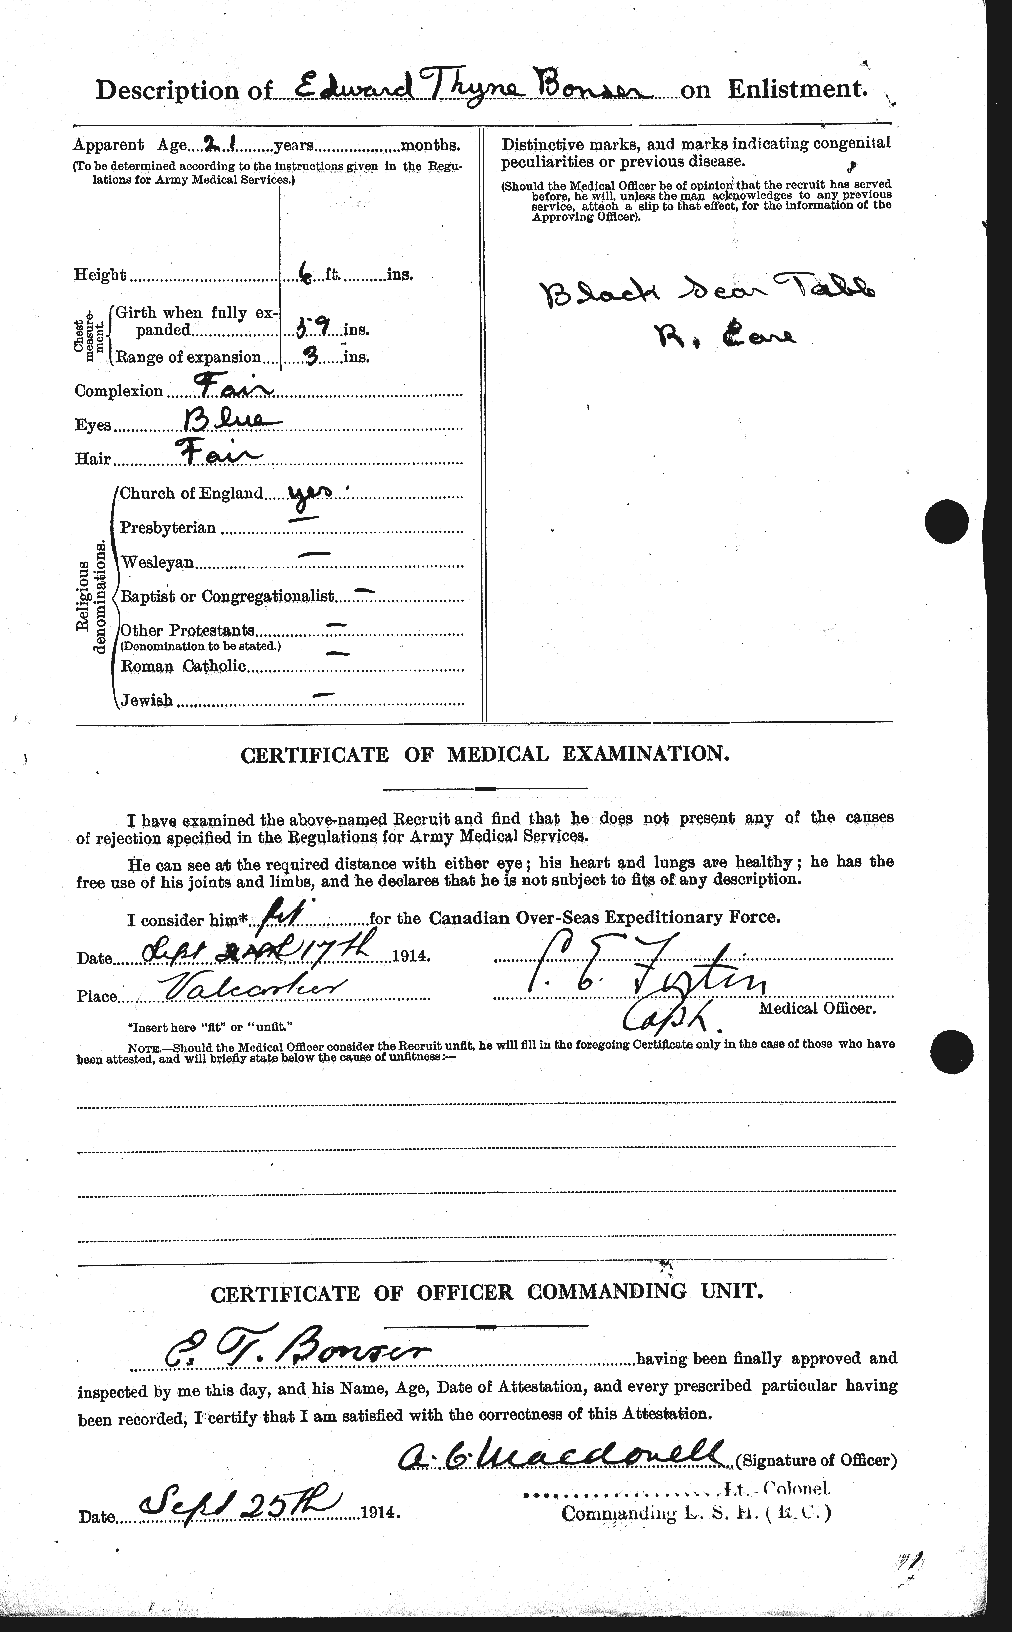 Personnel Records of the First World War - CEF 251162b